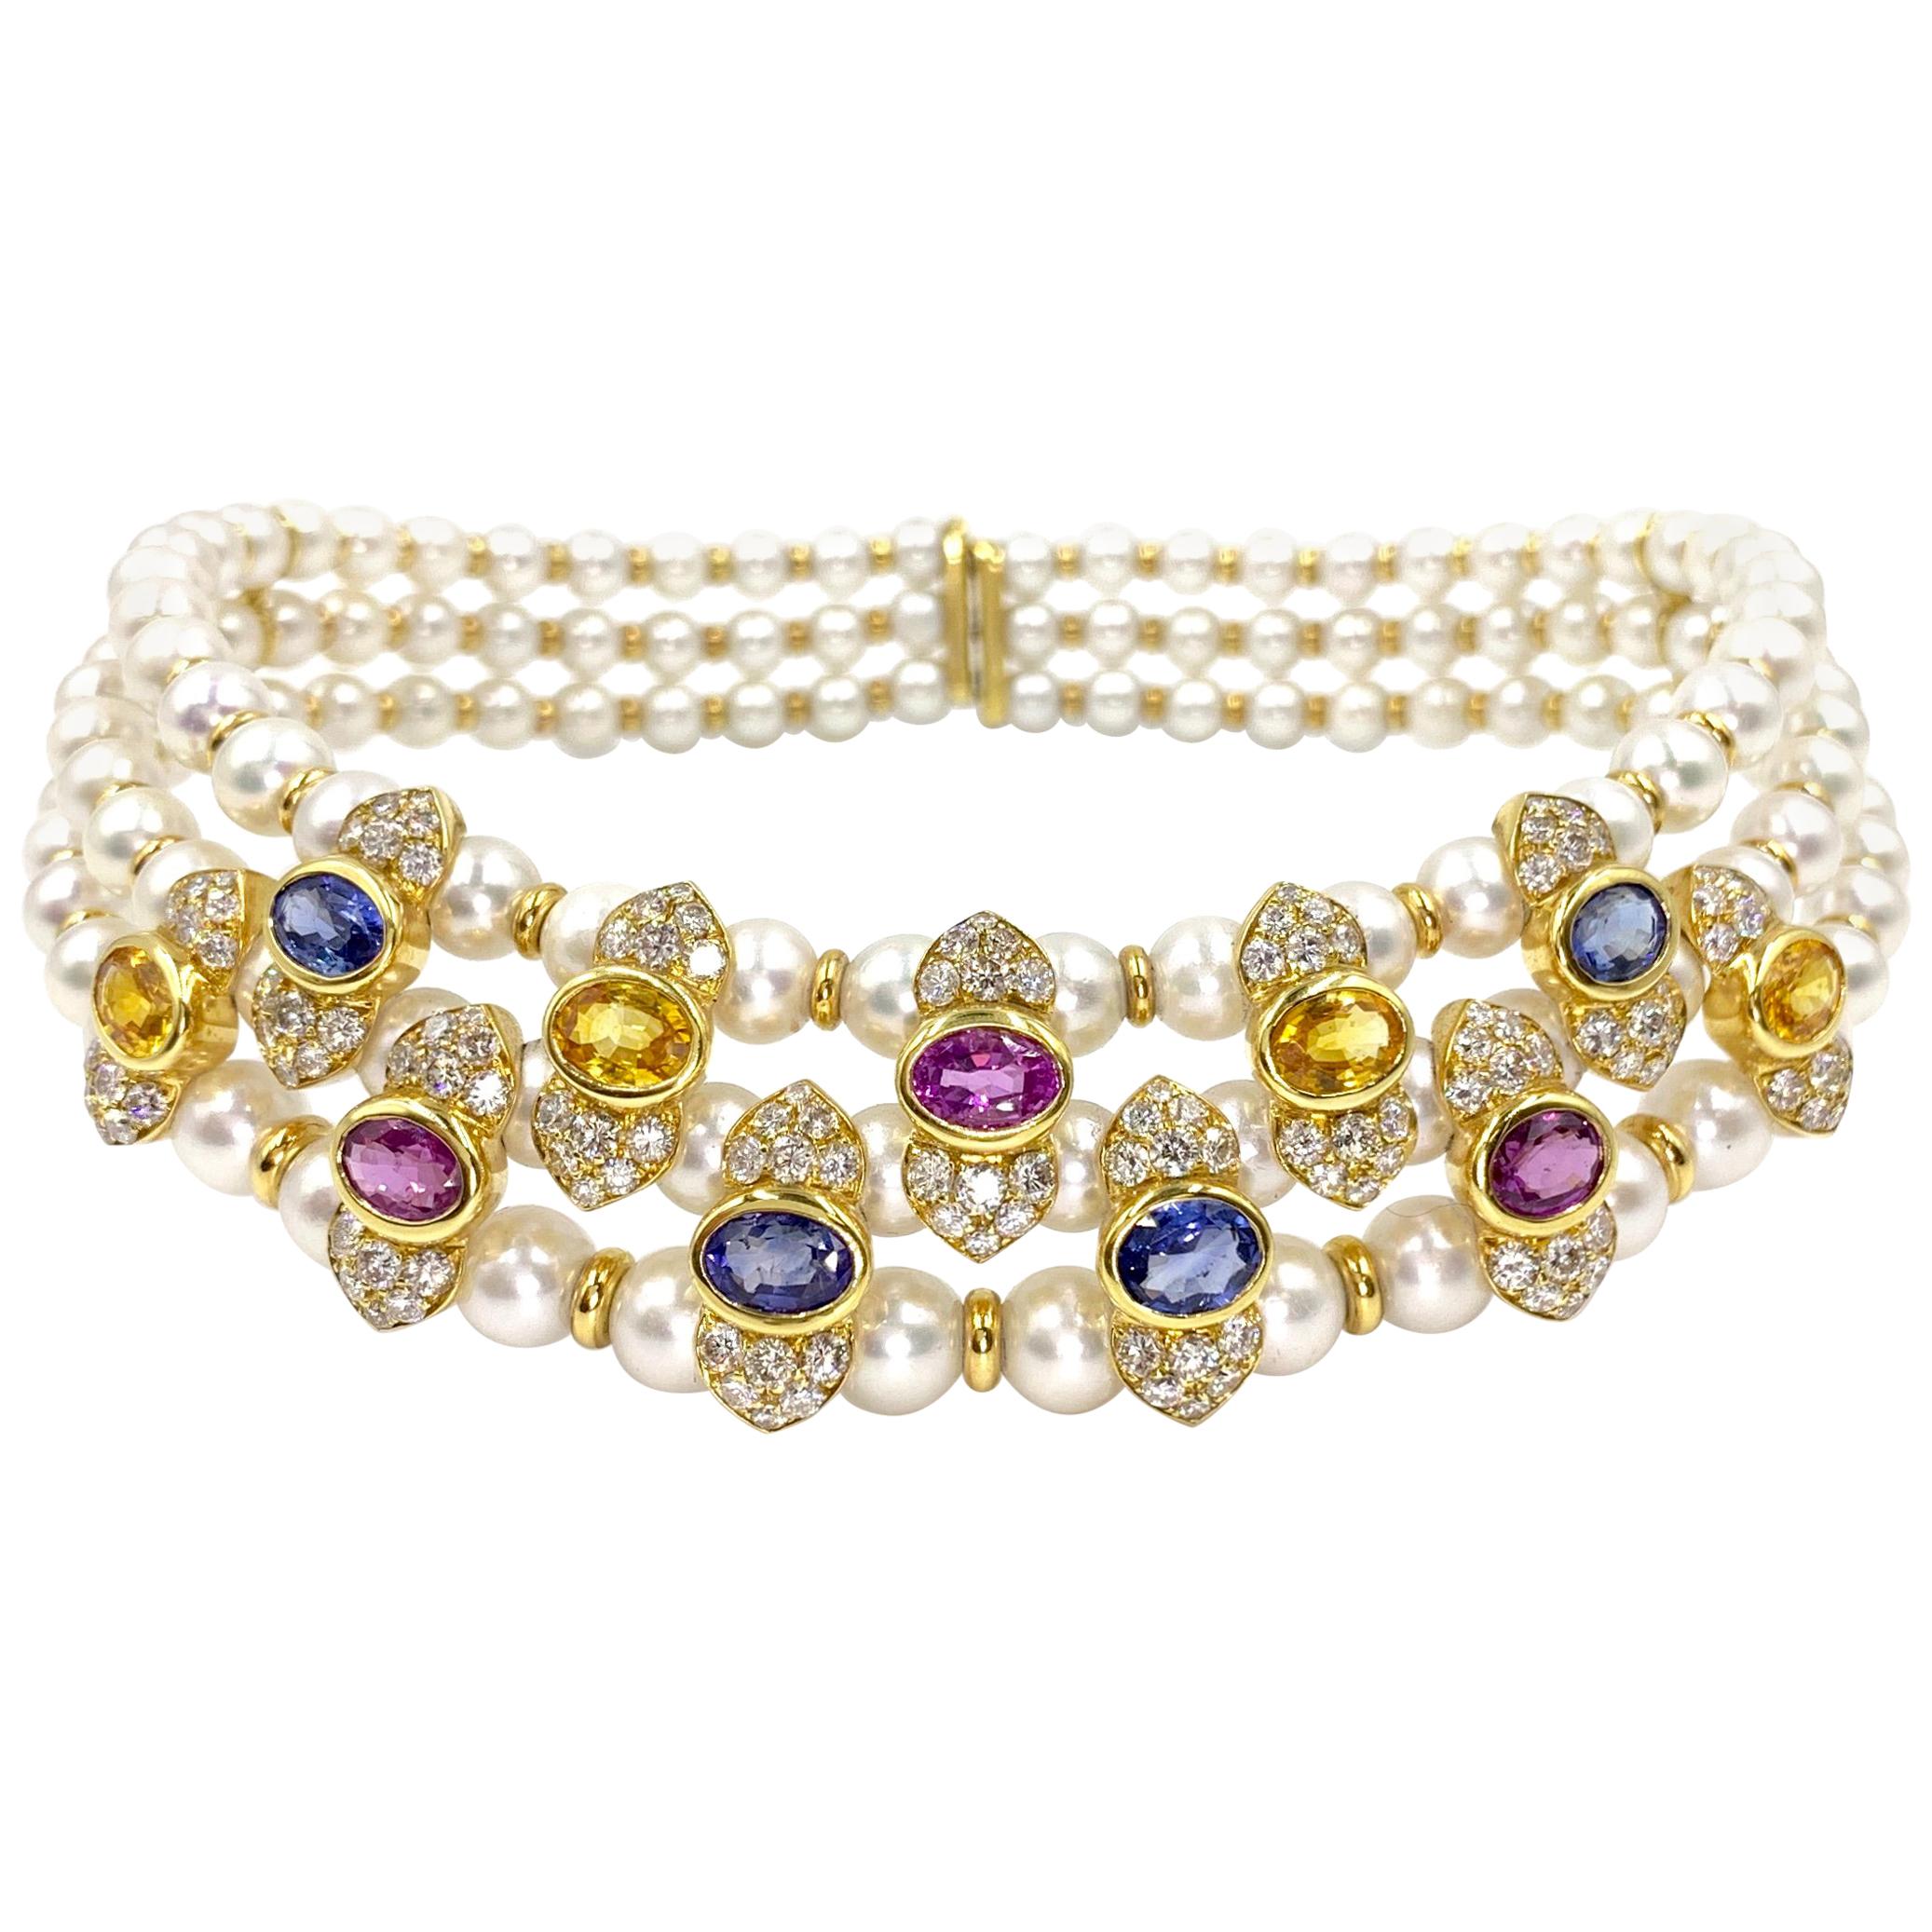 18 Karat Victorian Inspired Pearl, Sapphire and Diamond Choker Necklace For Sale